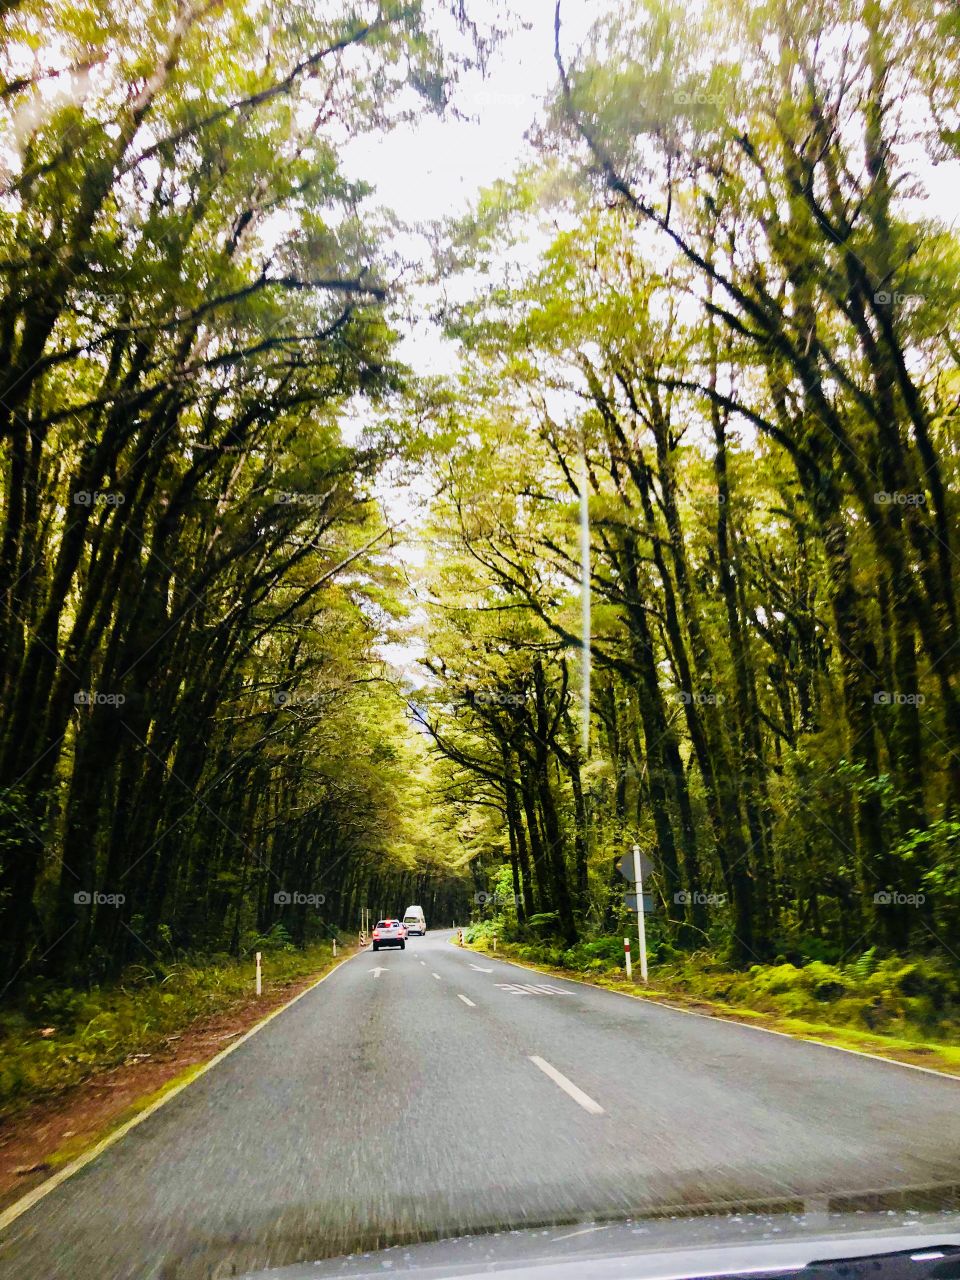 A road trip to Remember, with a beautiful leaf around and twinkle sounds of birds 